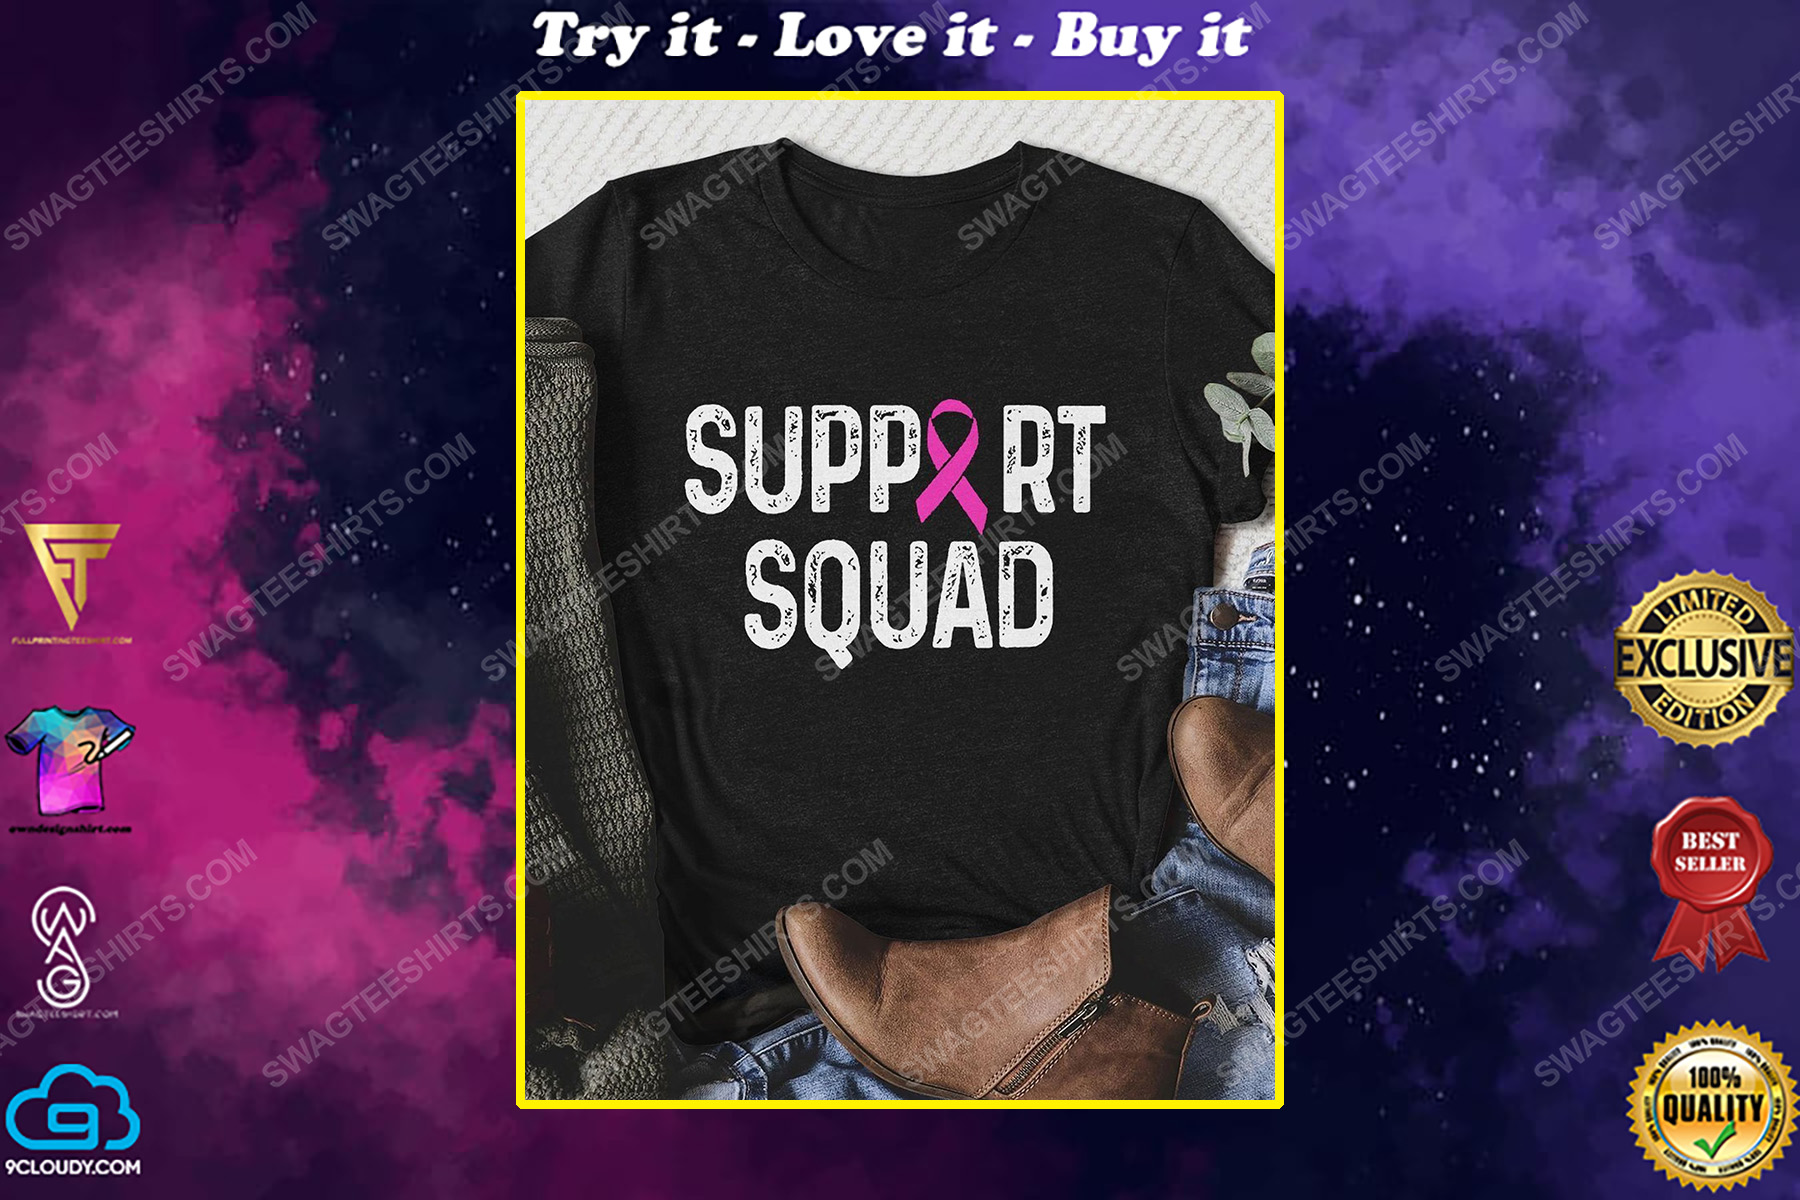 Breast cancer awareness support squad shirt